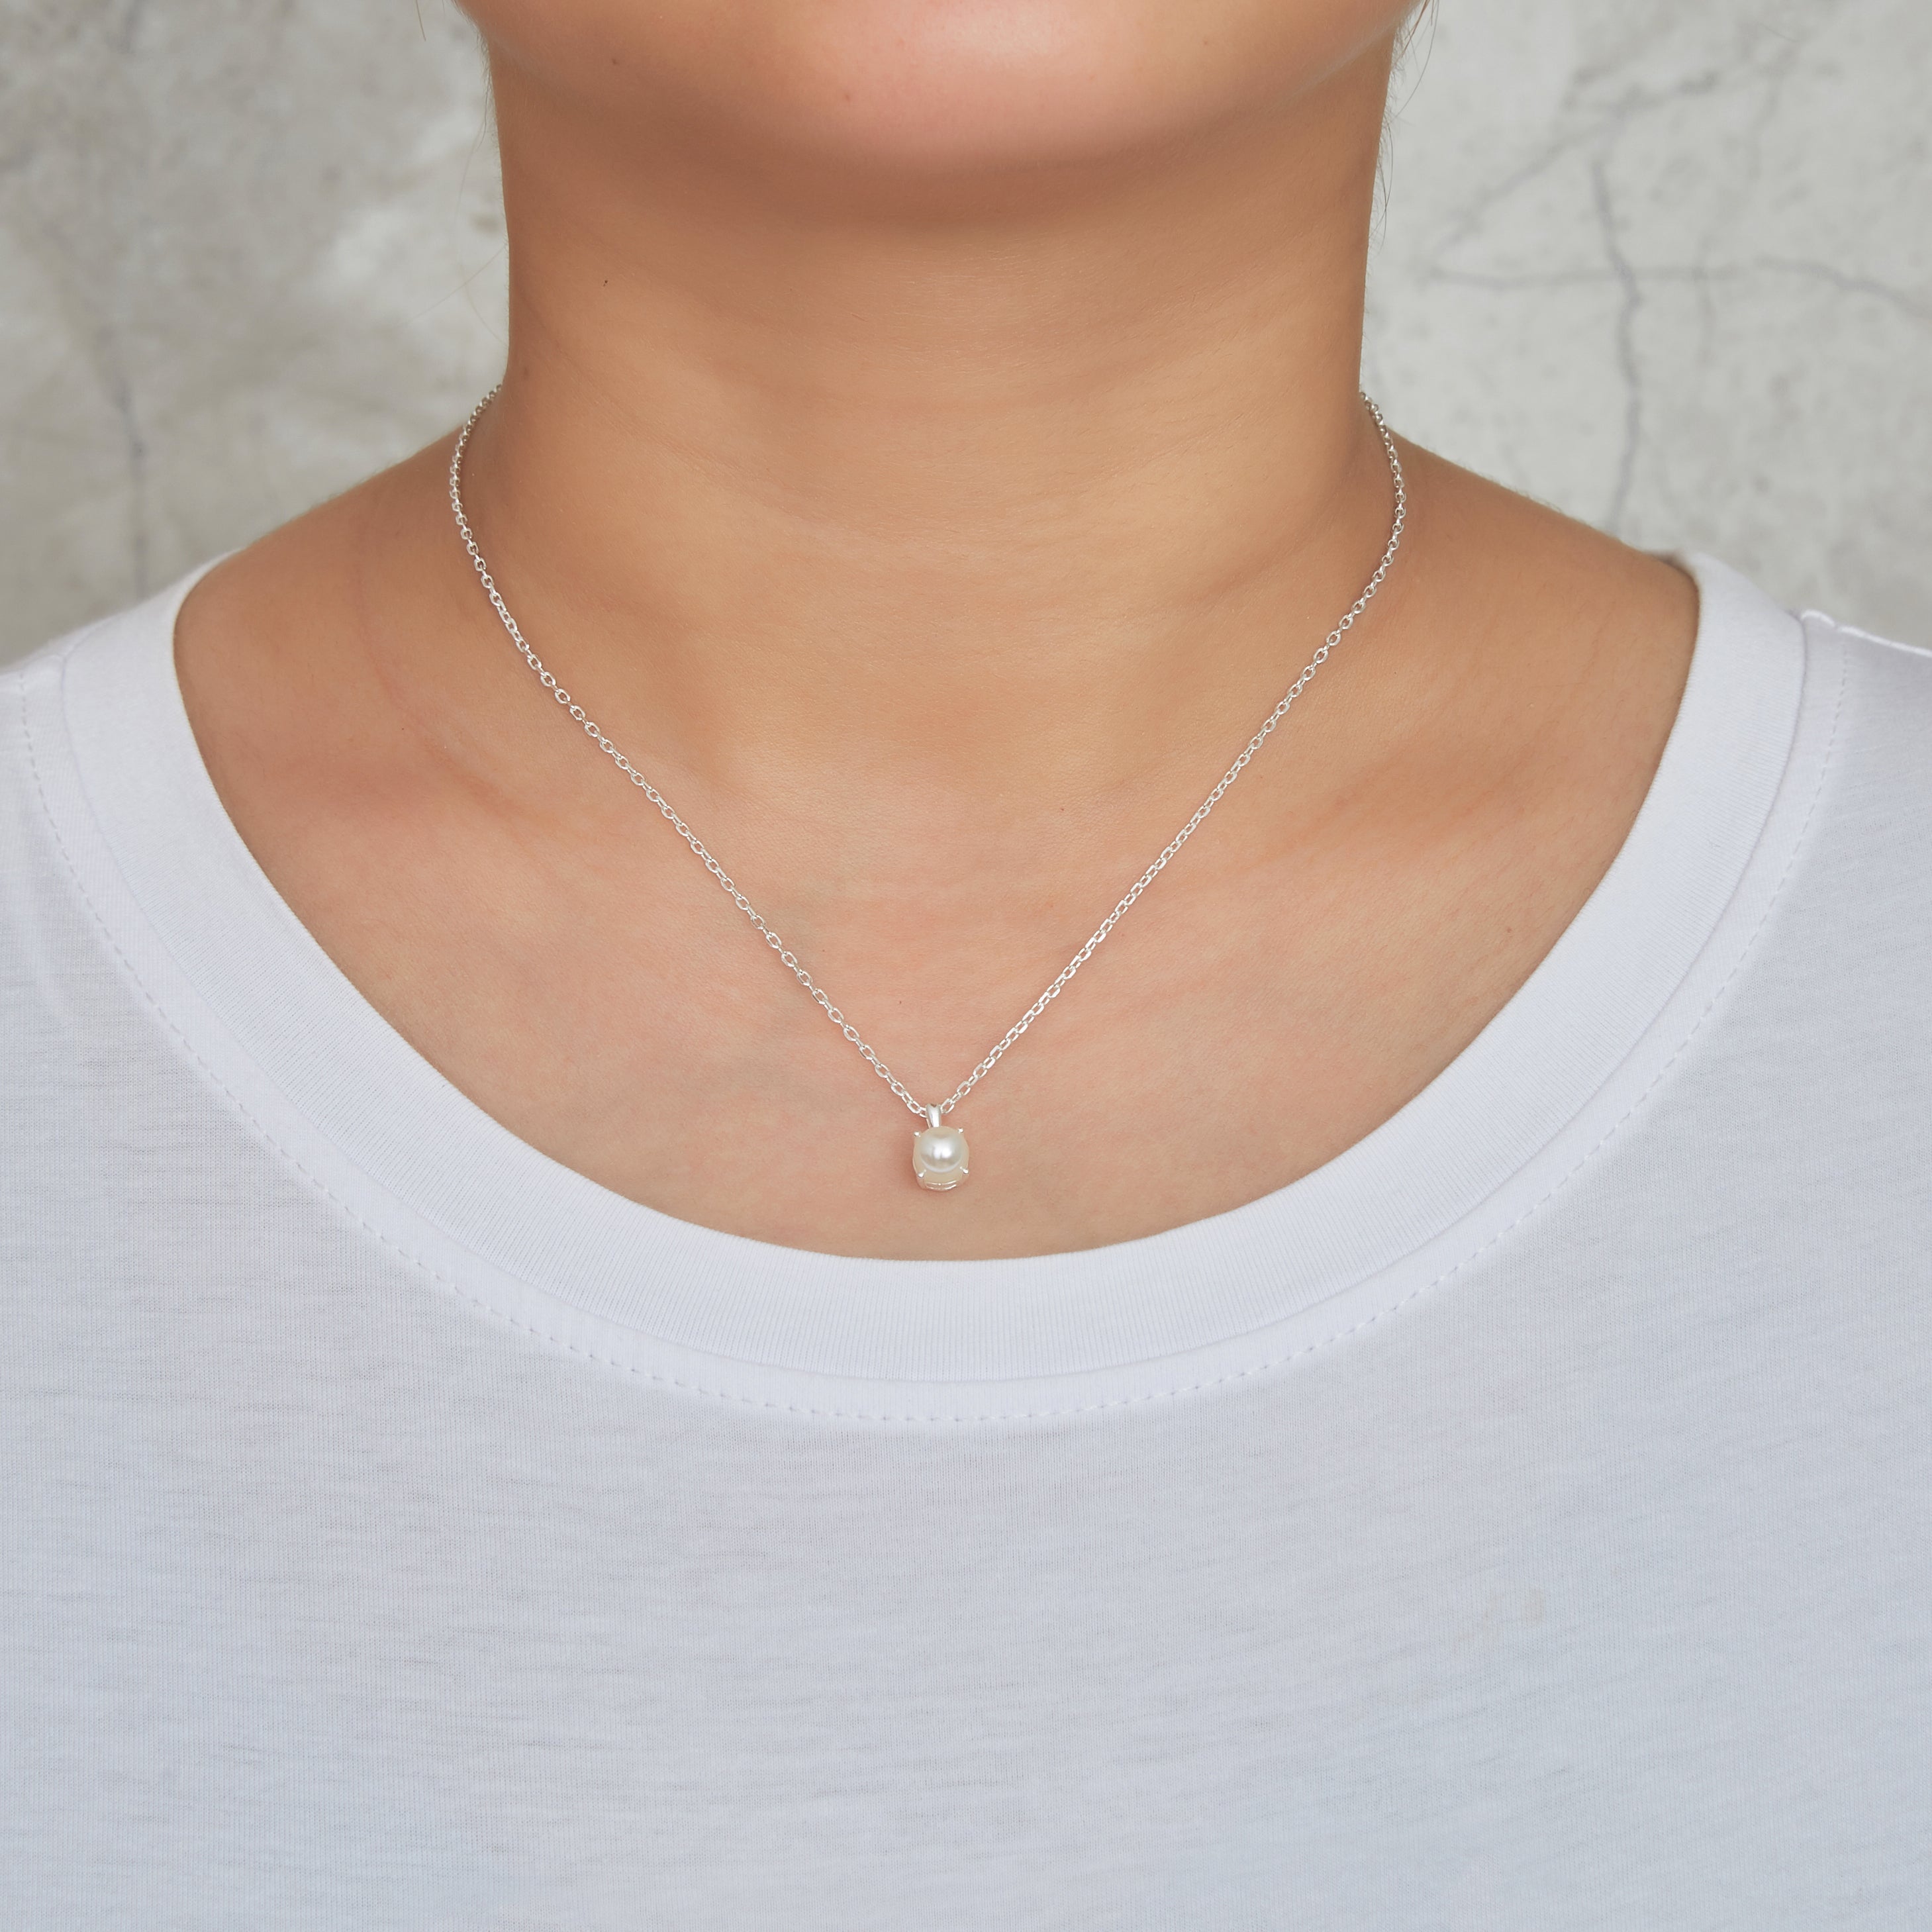 Sterling Silver June (Pearl) Birthstone Necklace Created with Gemstones from Zircondia®